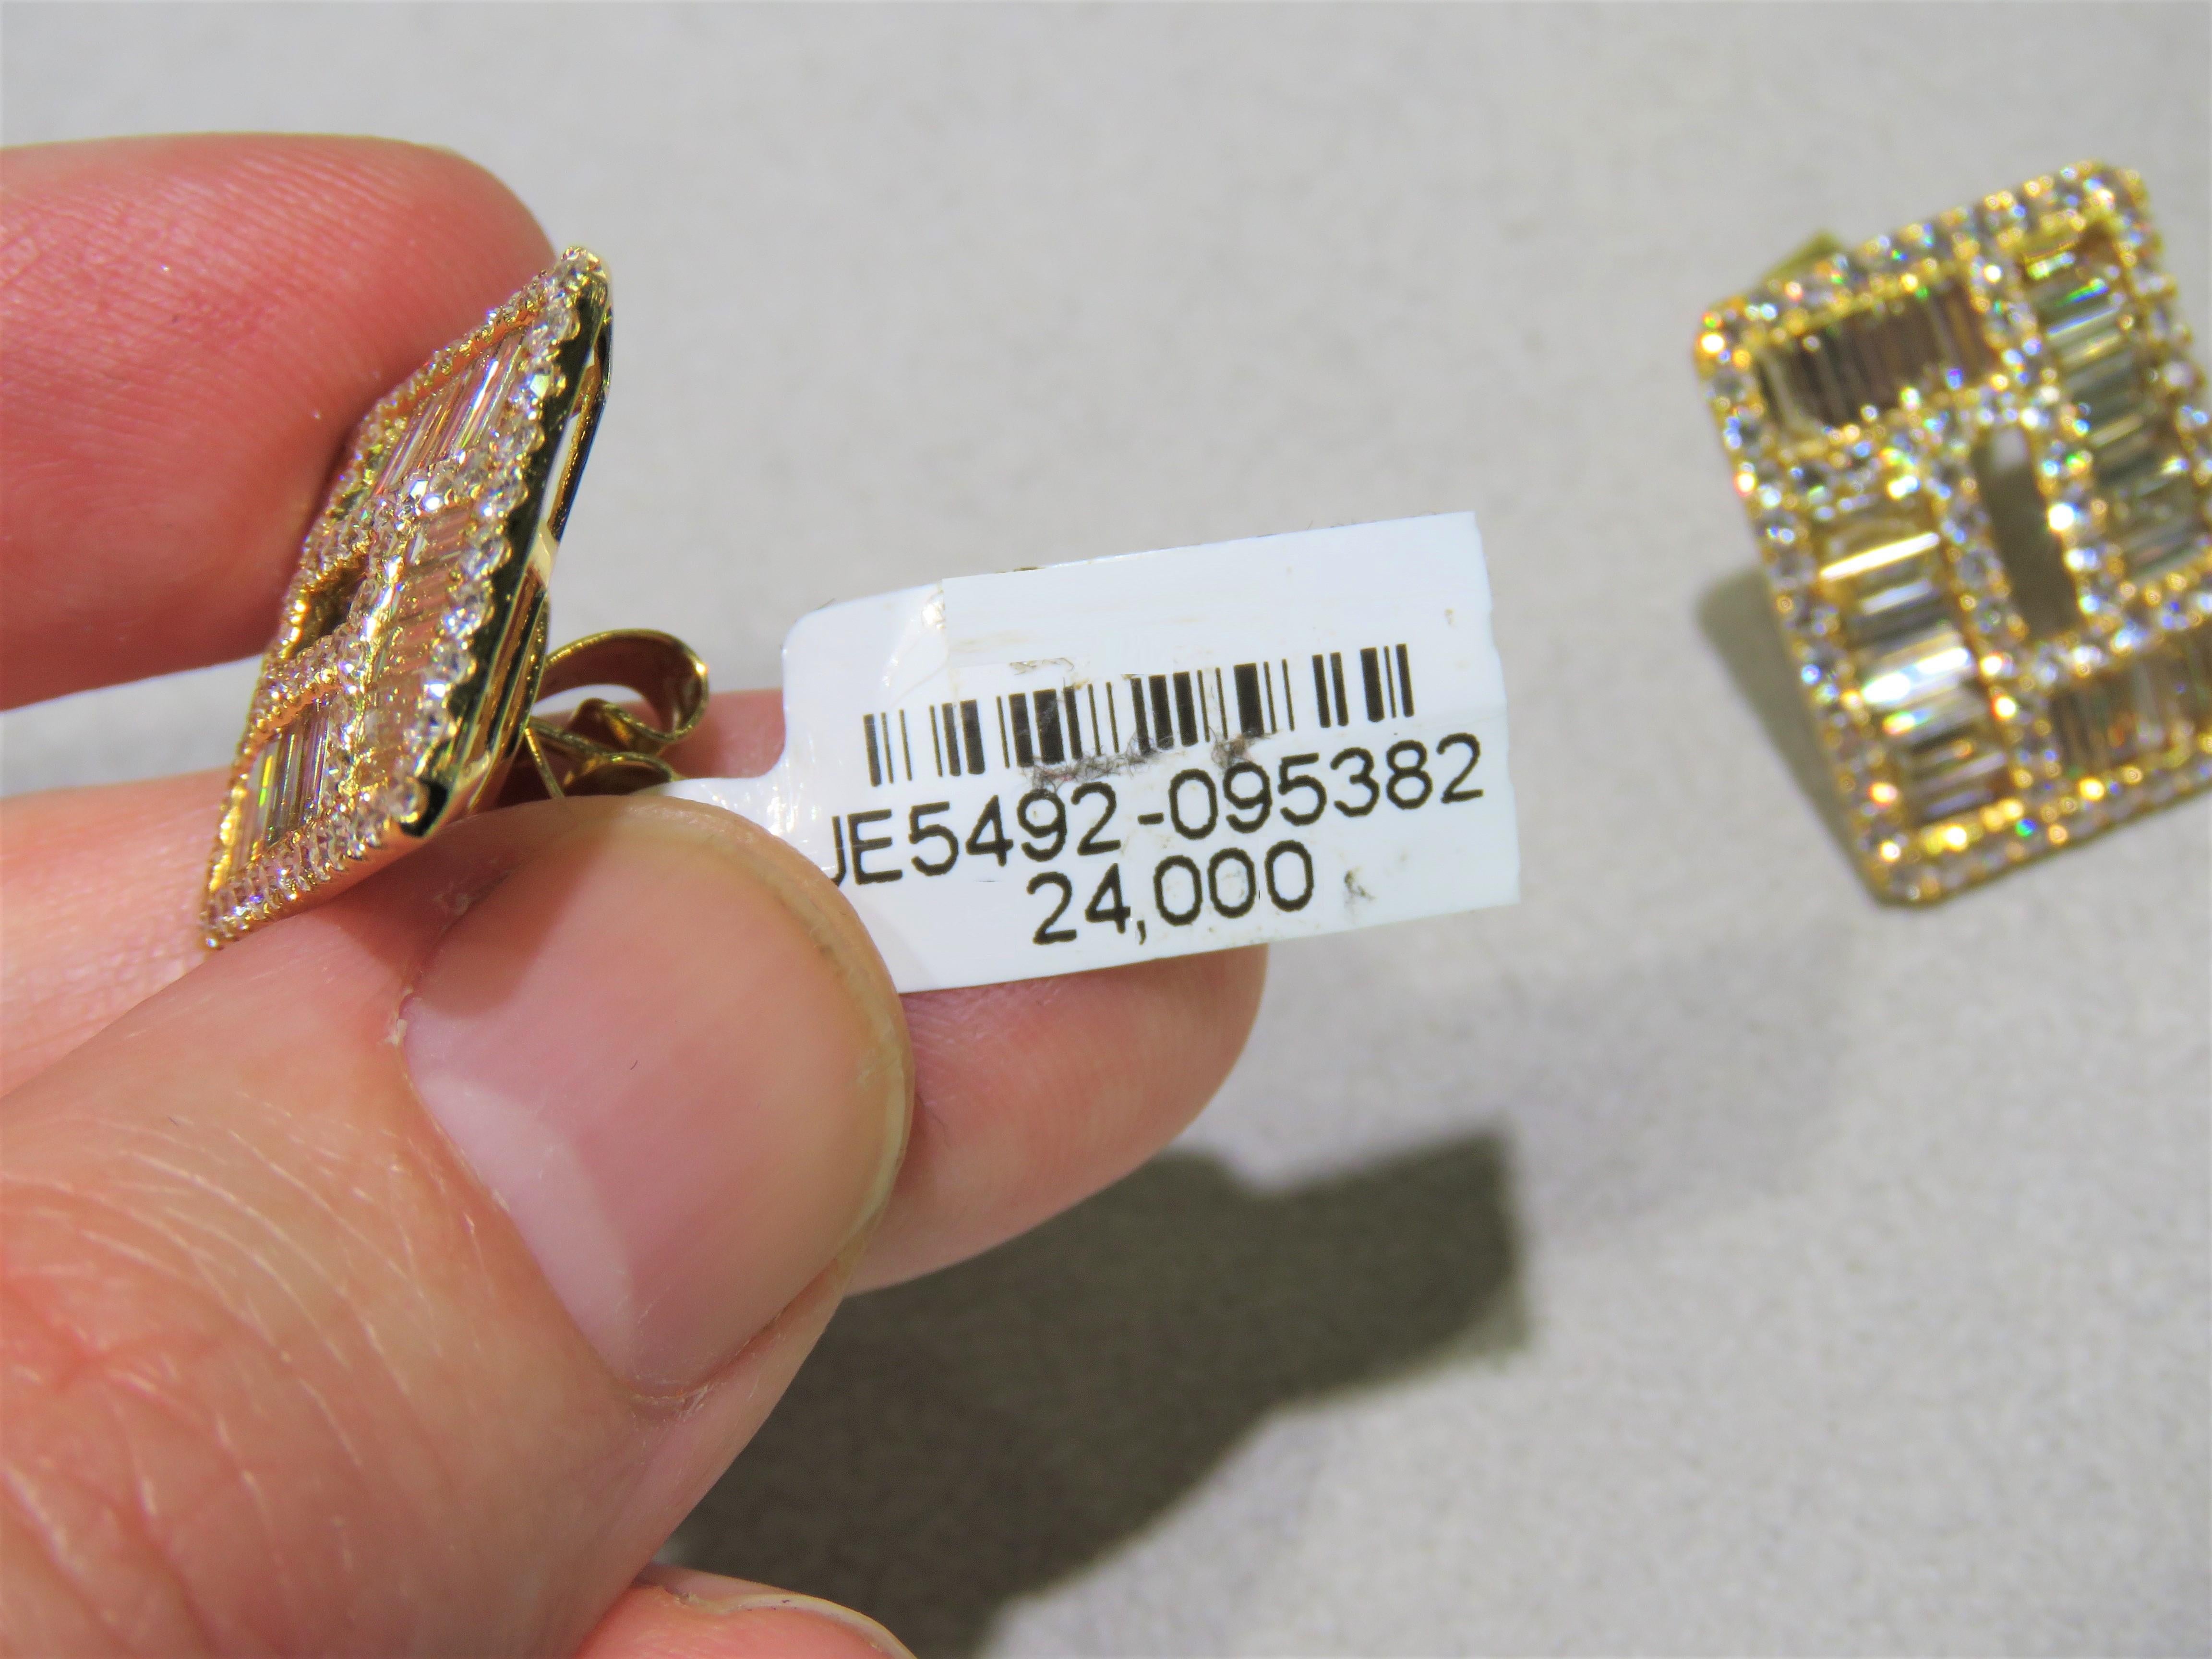 NWT $24, 000 Rare 18KT Yellow Gold Fancy Baguette Trillion Cut Diamond Earrings In New Condition For Sale In New York, NY